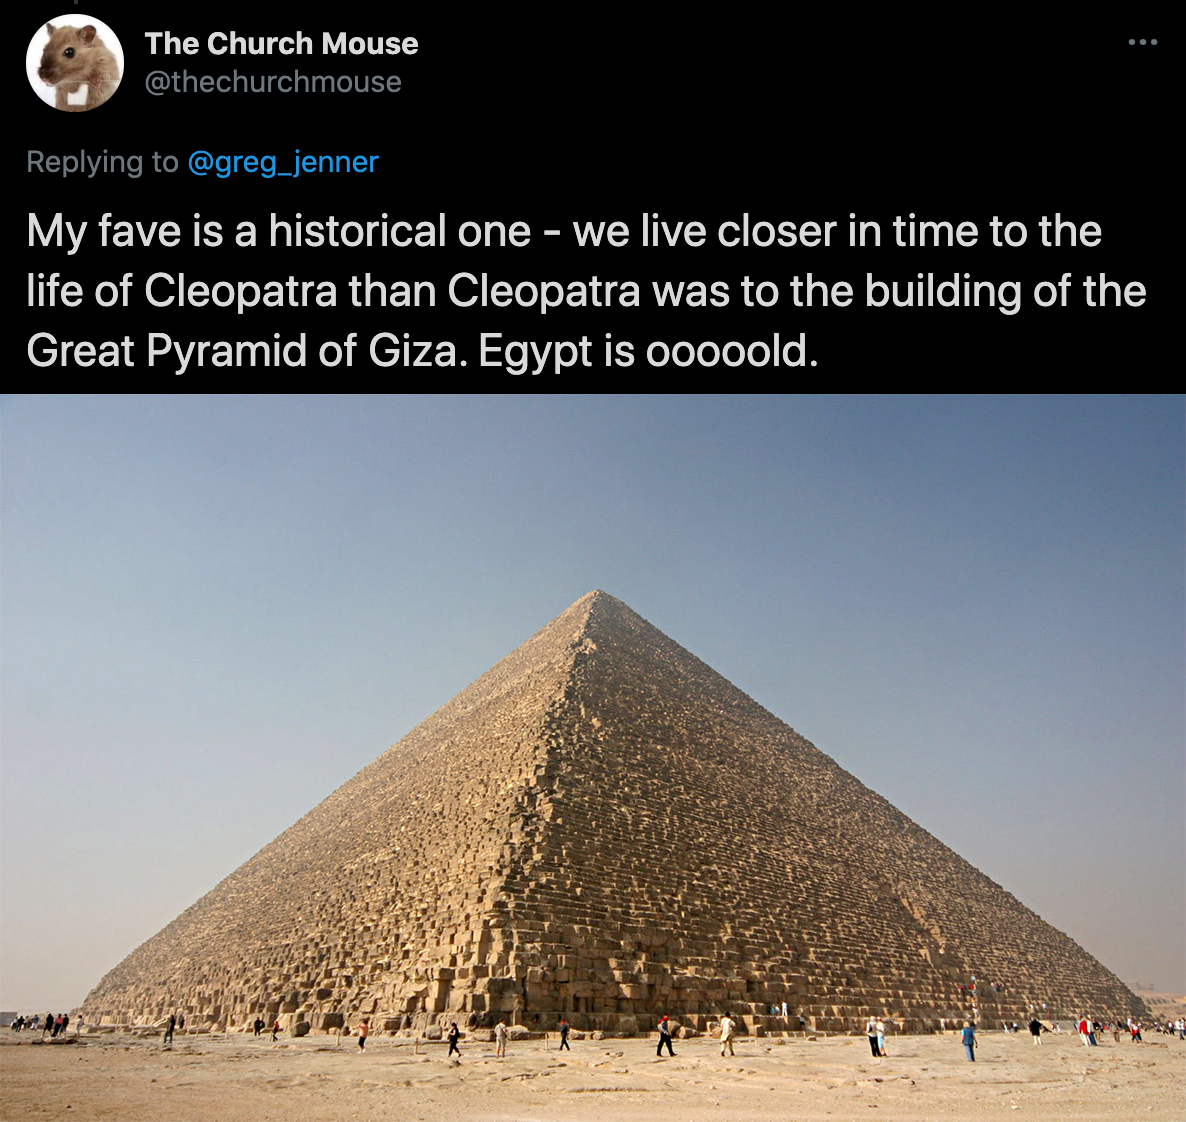 cool facts - My fave is a historical one we live closer in time to the life of Cleopatra than Cleopatra was to the building of the Great Pyramid of Giza. Egypt is ooooold.